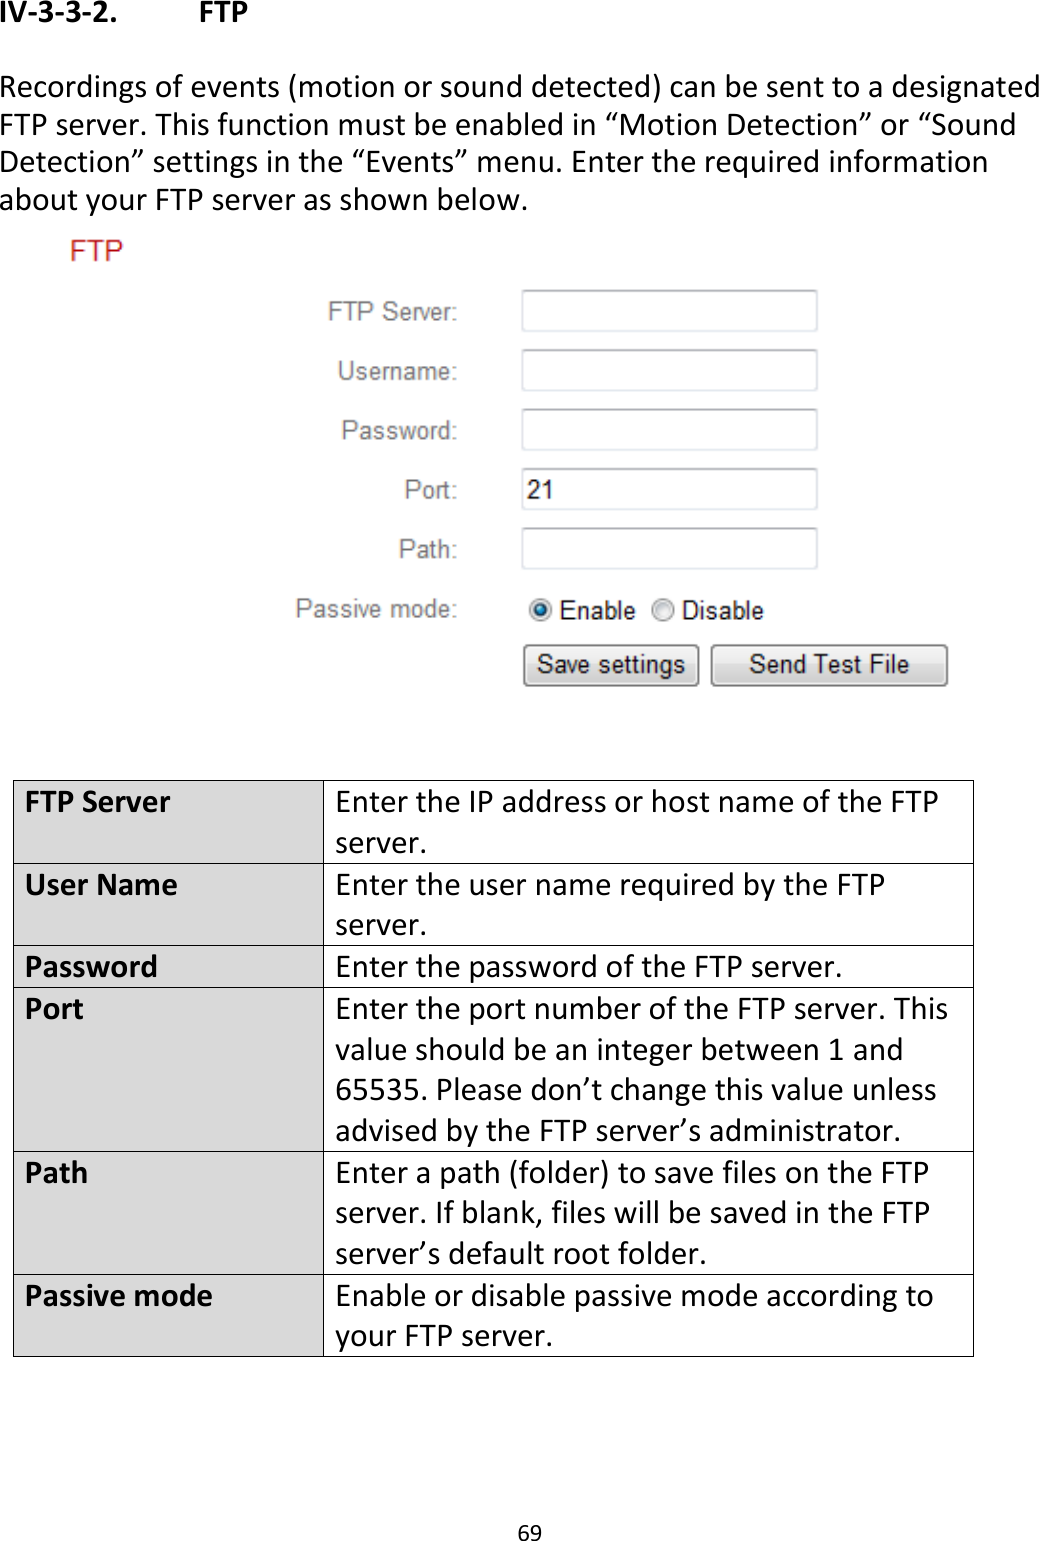 69  IV-3-3-2.    FTP  Recordings of events (motion or sound detected) can be sent to a designated FTP server. This function must be enabled in “Motion Detection” or “Sound Detection” settings in the “Events” menu. Enter the required information about your FTP server as shown below.   FTP Server Enter the IP address or host name of the FTP server. User Name Enter the user name required by the FTP server. Password Enter the password of the FTP server. Port Enter the port number of the FTP server. This value should be an integer between 1 and 65535. Please don’t change this value unless advised by the FTP server’s administrator. Path Enter a path (folder) to save files on the FTP server. If blank, files will be saved in the FTP server’s default root folder. Passive mode Enable or disable passive mode according to your FTP server.   